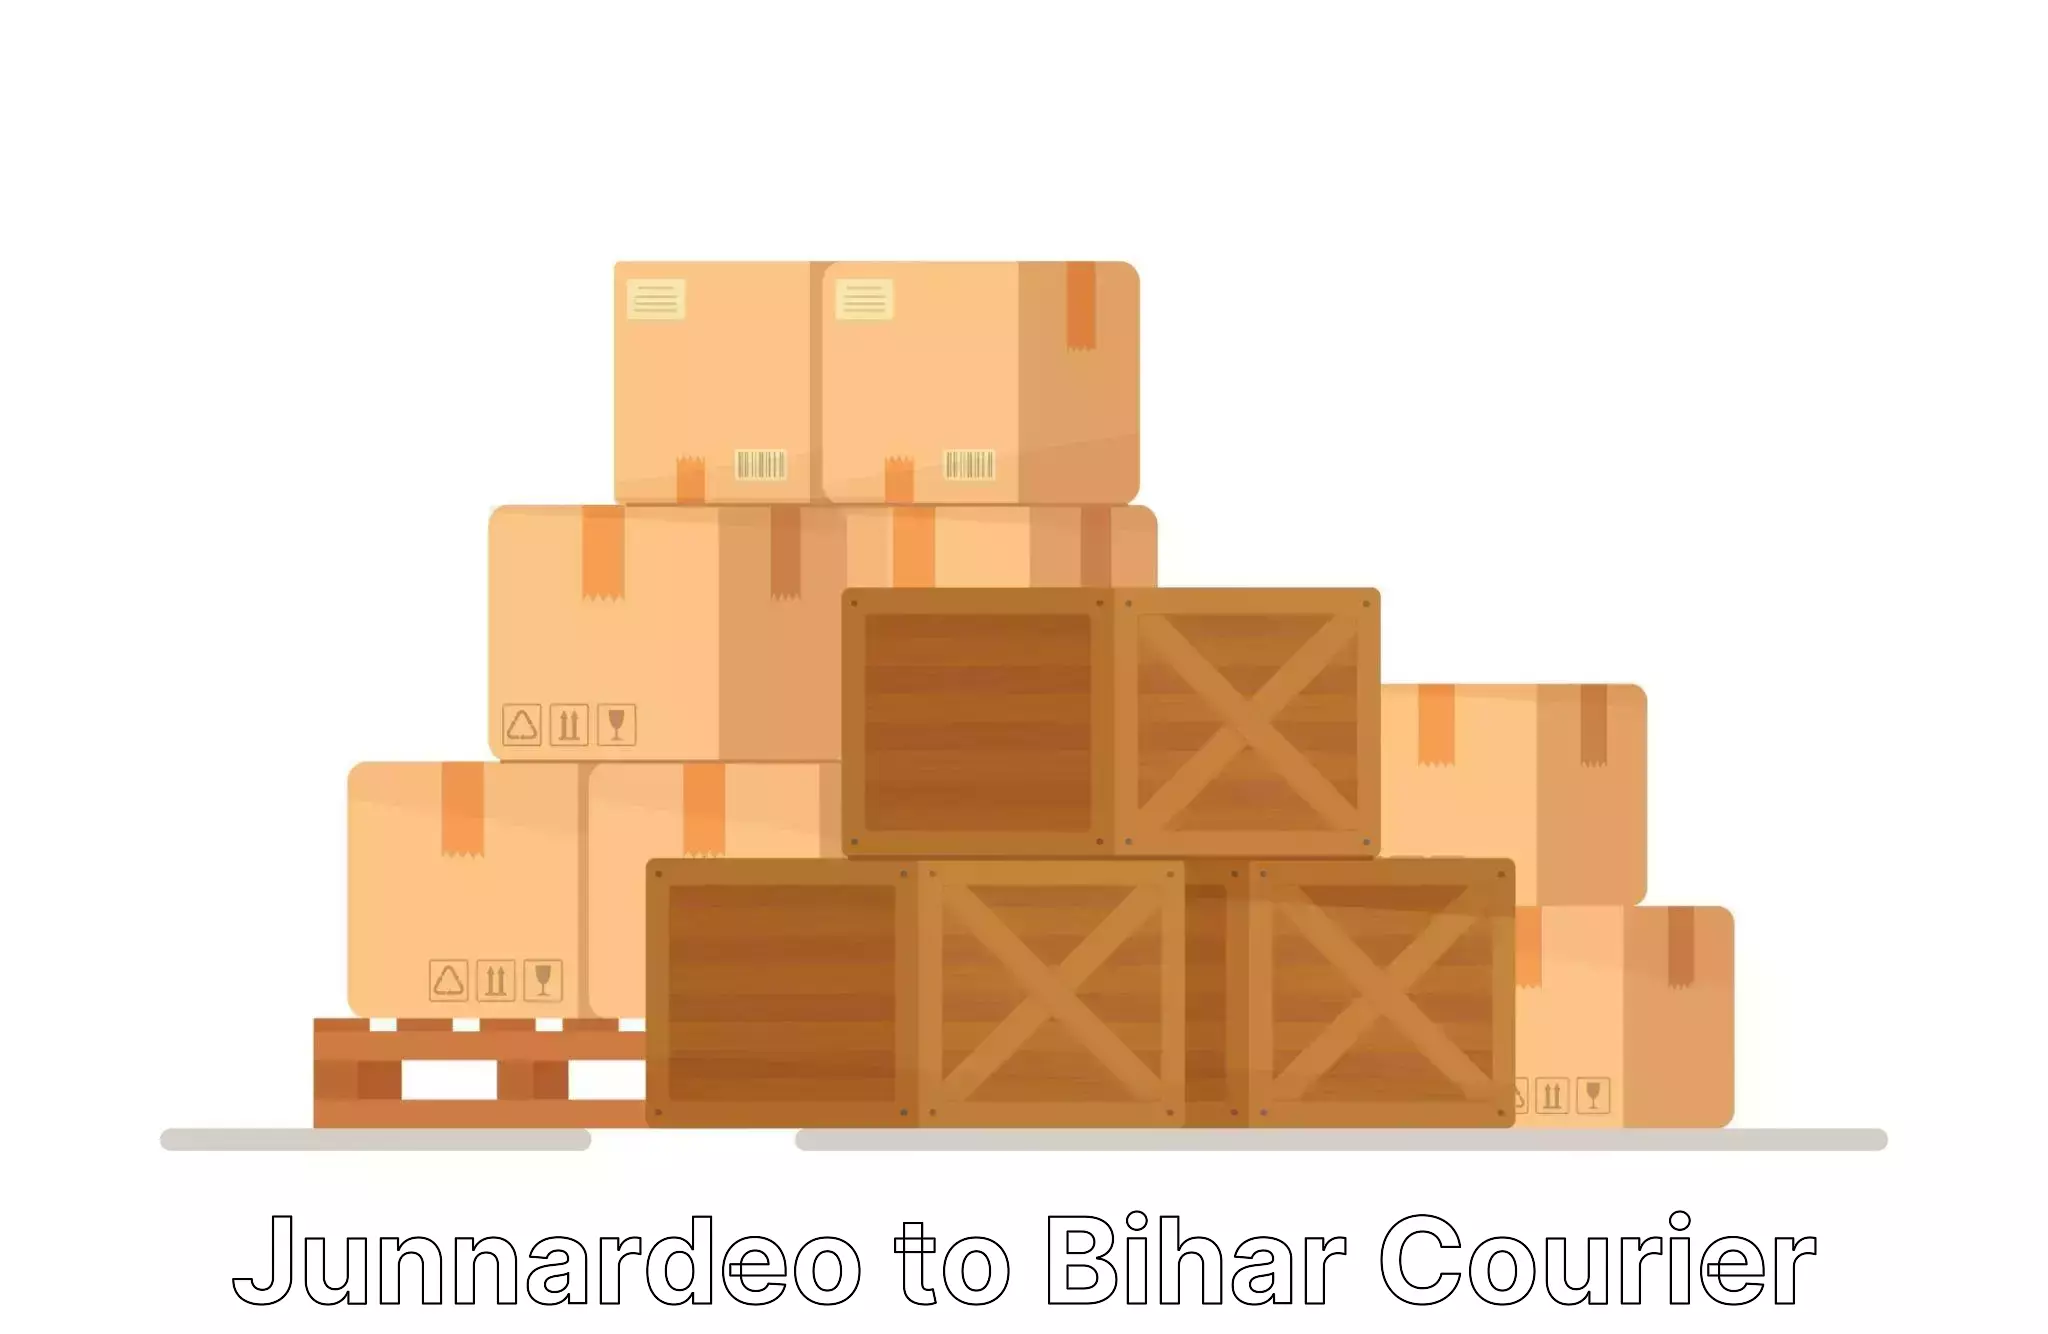 Furniture moving services in Junnardeo to Bihar